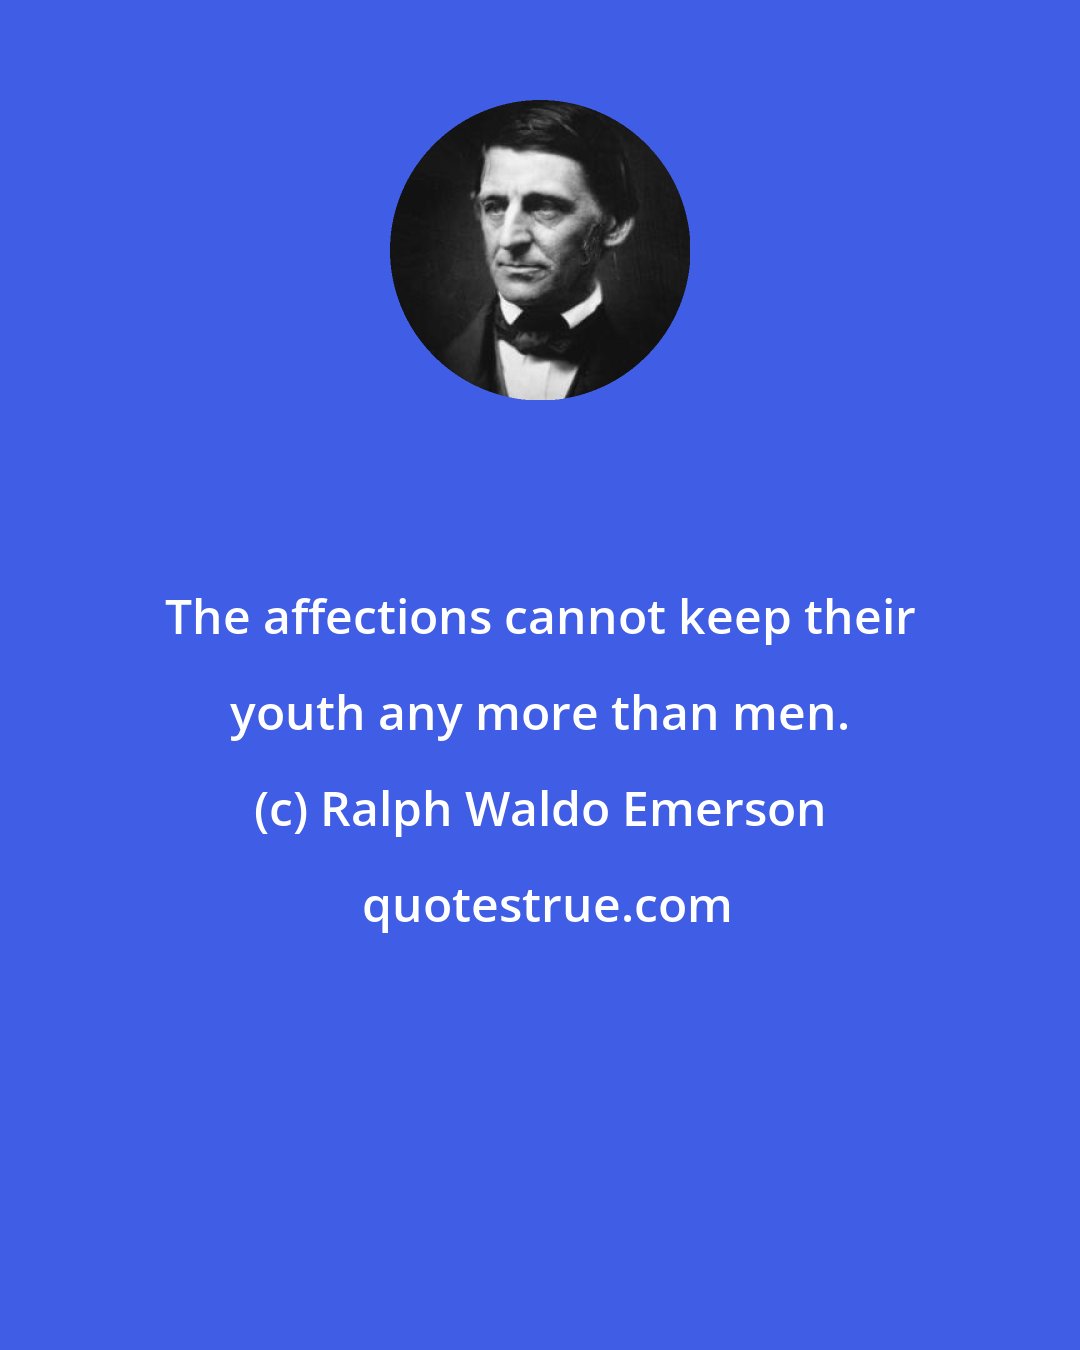 Ralph Waldo Emerson: The affections cannot keep their youth any more than men.